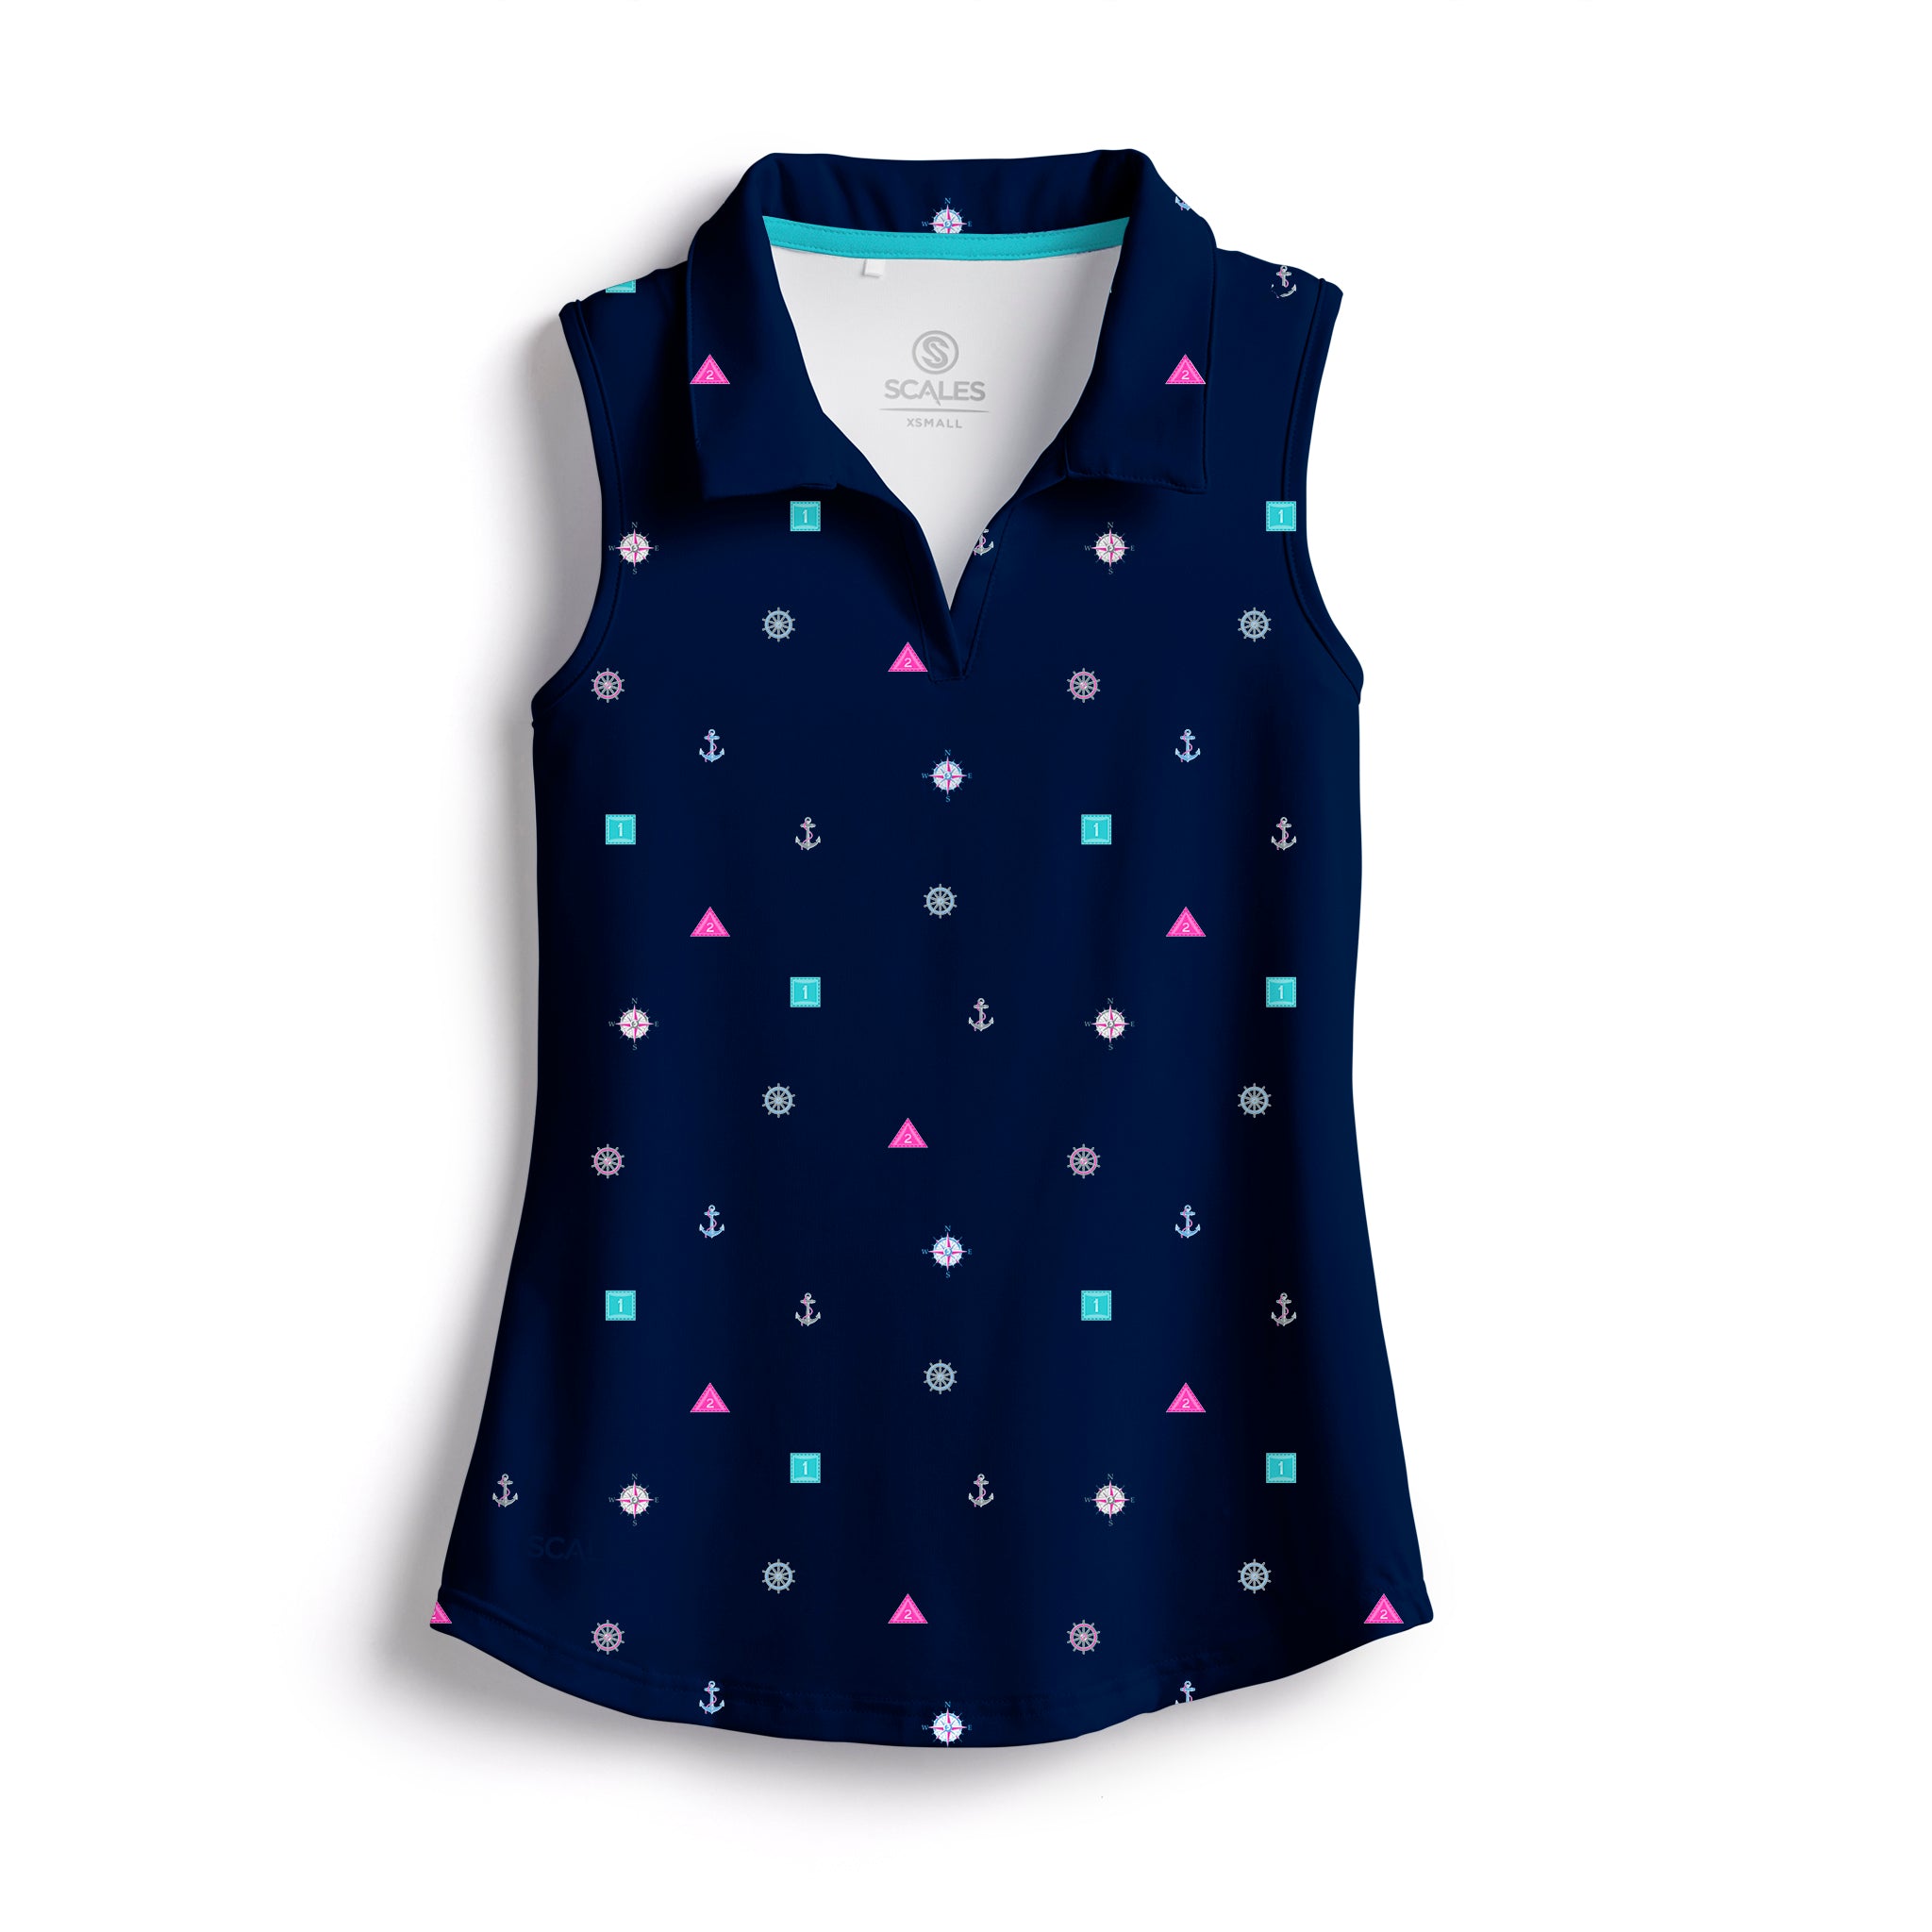 Scales Qualified Womens Sleeveless Polo in Navy Size S